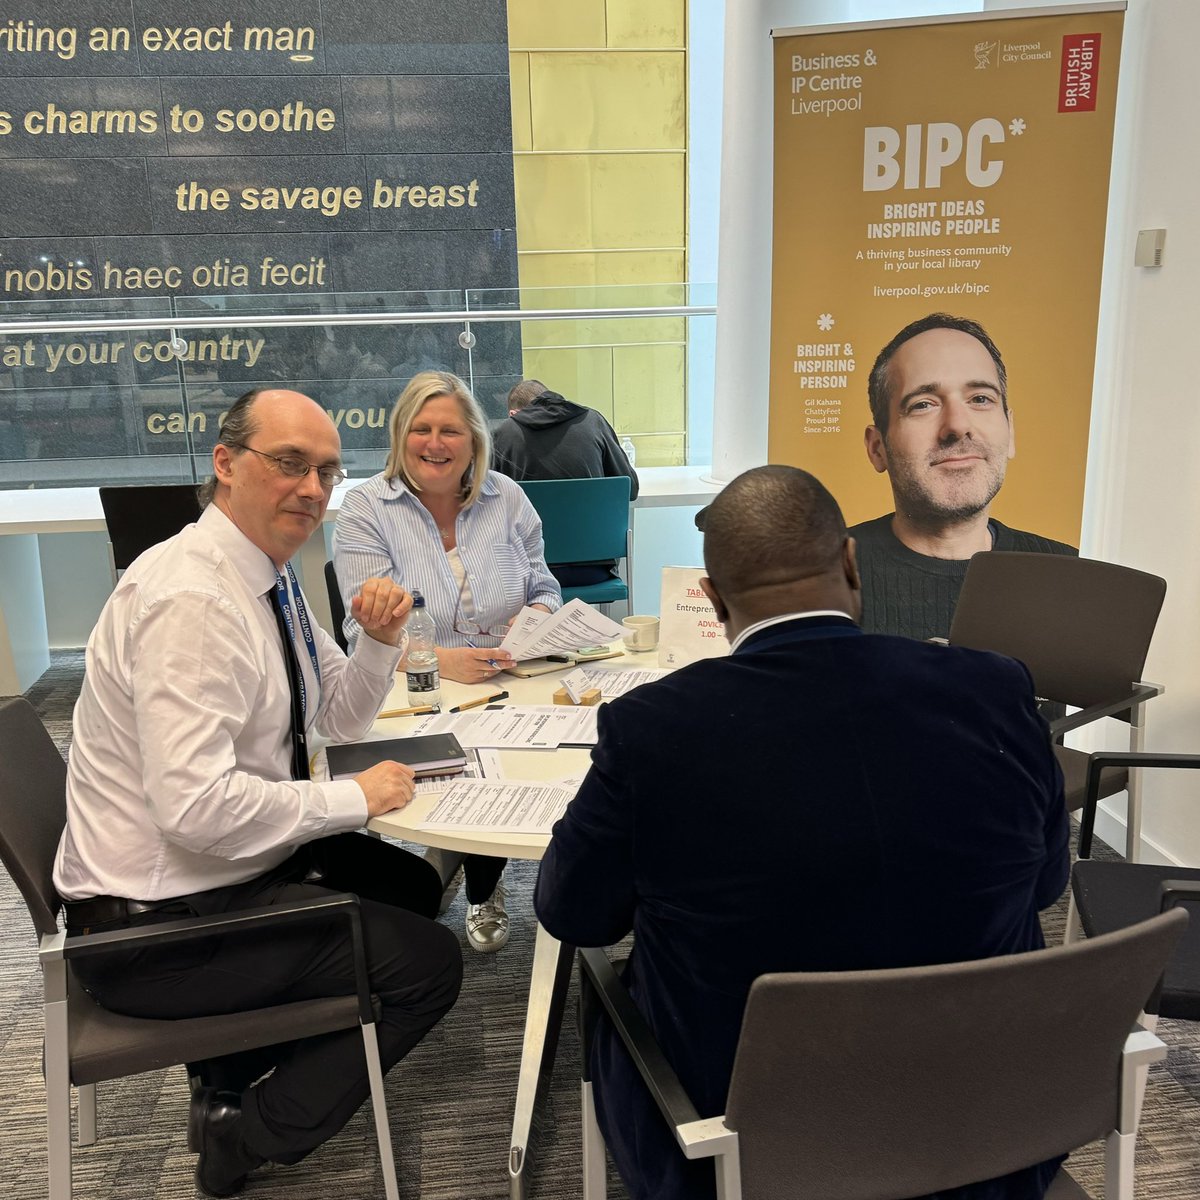 Thank you to my volunteers Jenny Wallwork, Donal Bannon, Chris Williams, plus Alex and Paul from the Liverpool Business & IP Centre team for their wonderful support this afternoon. An extremely busy Entrepreneur in Residence Business Clinic and inspiring as always.